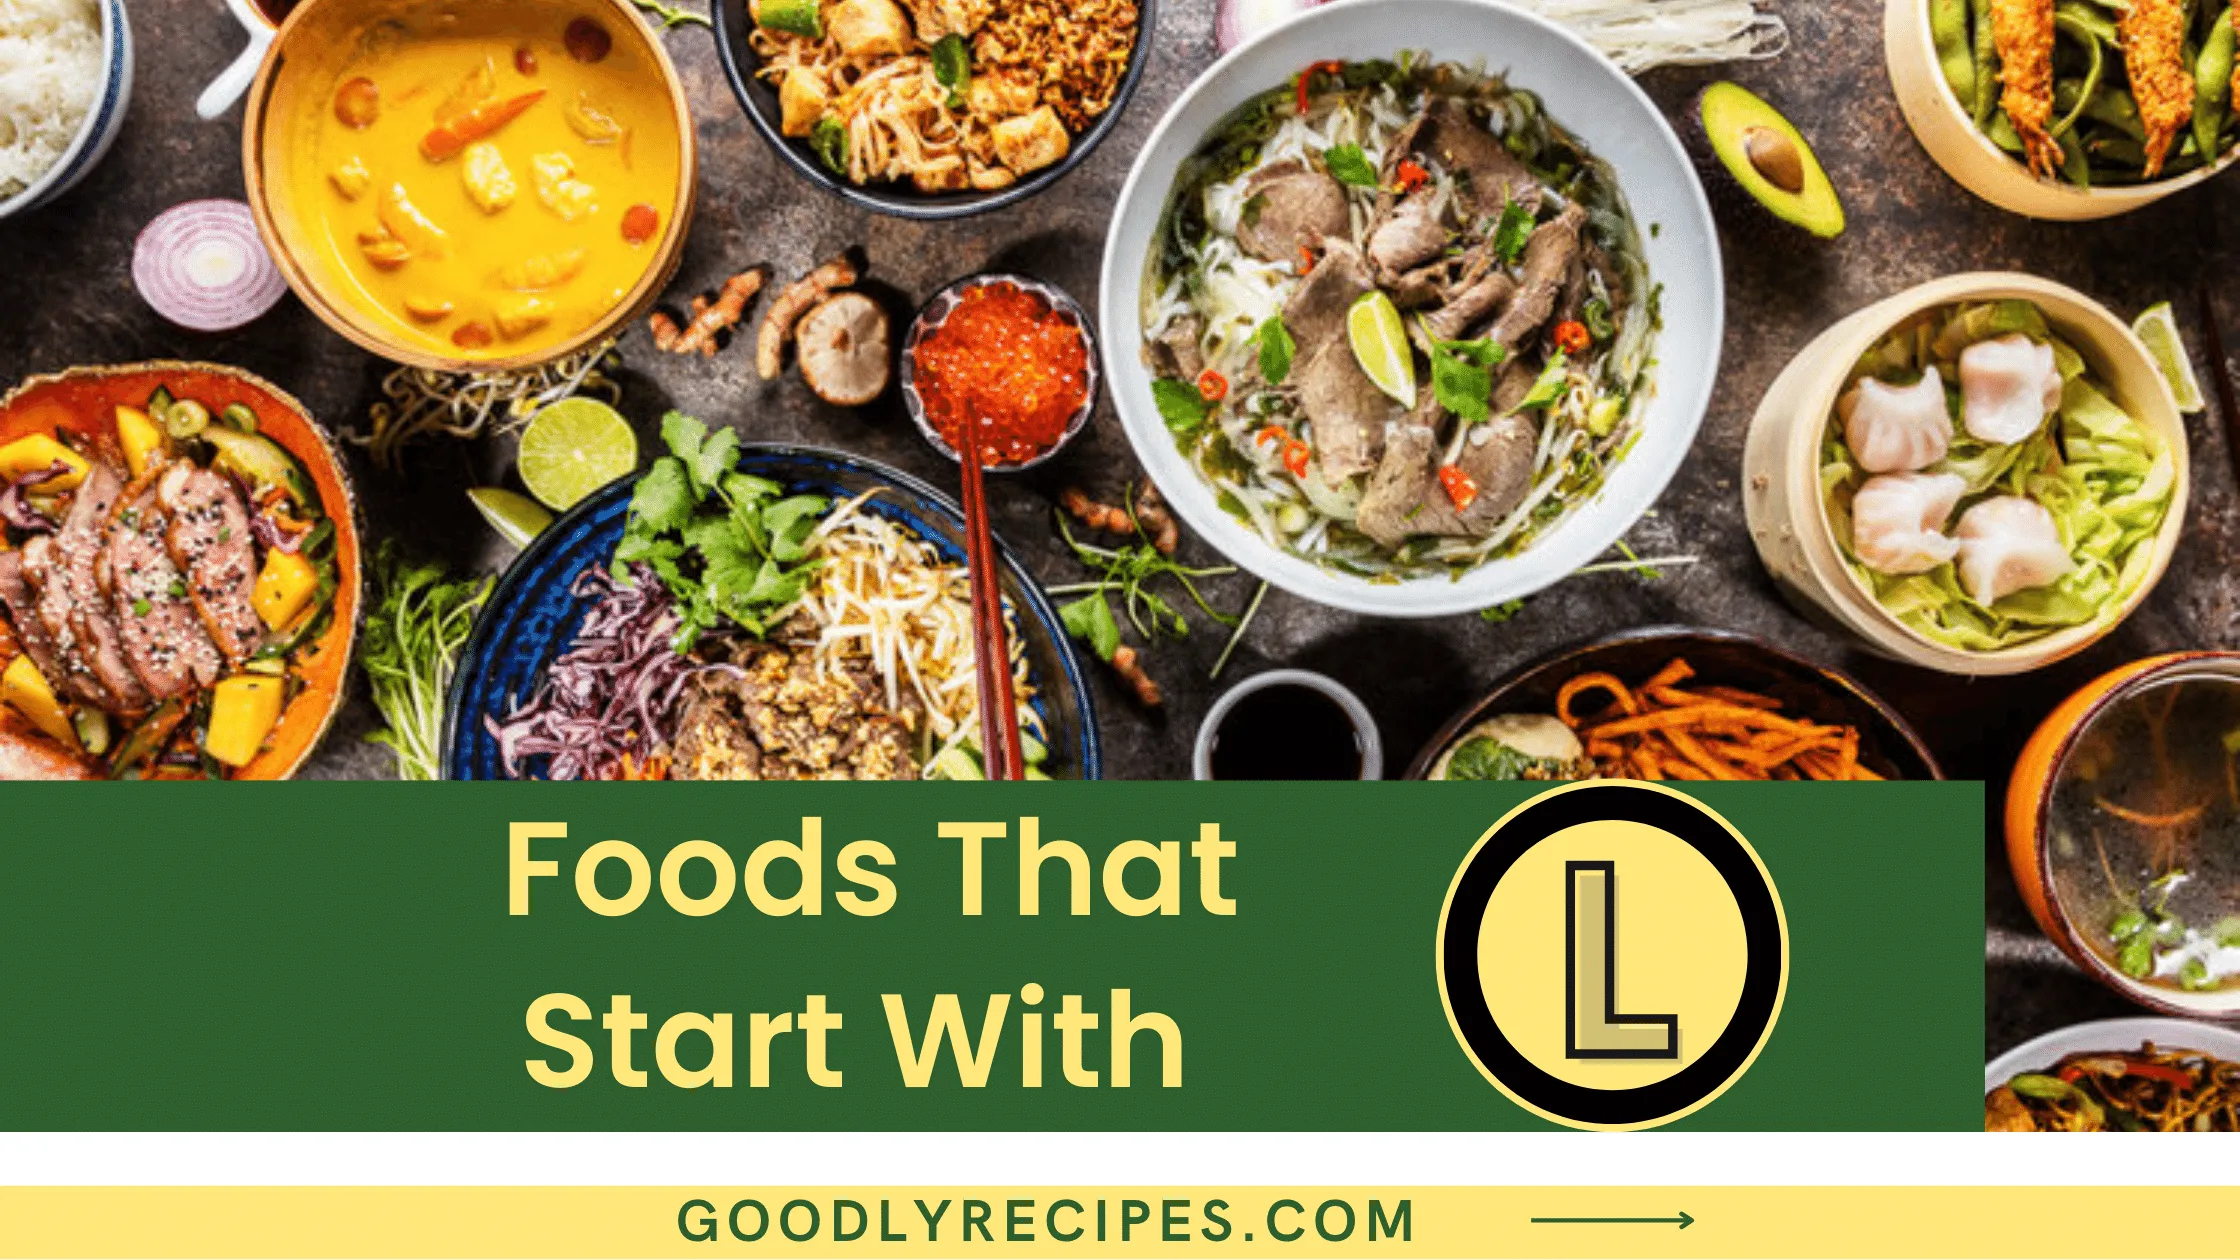 Foods That Start With L - Special Dishes